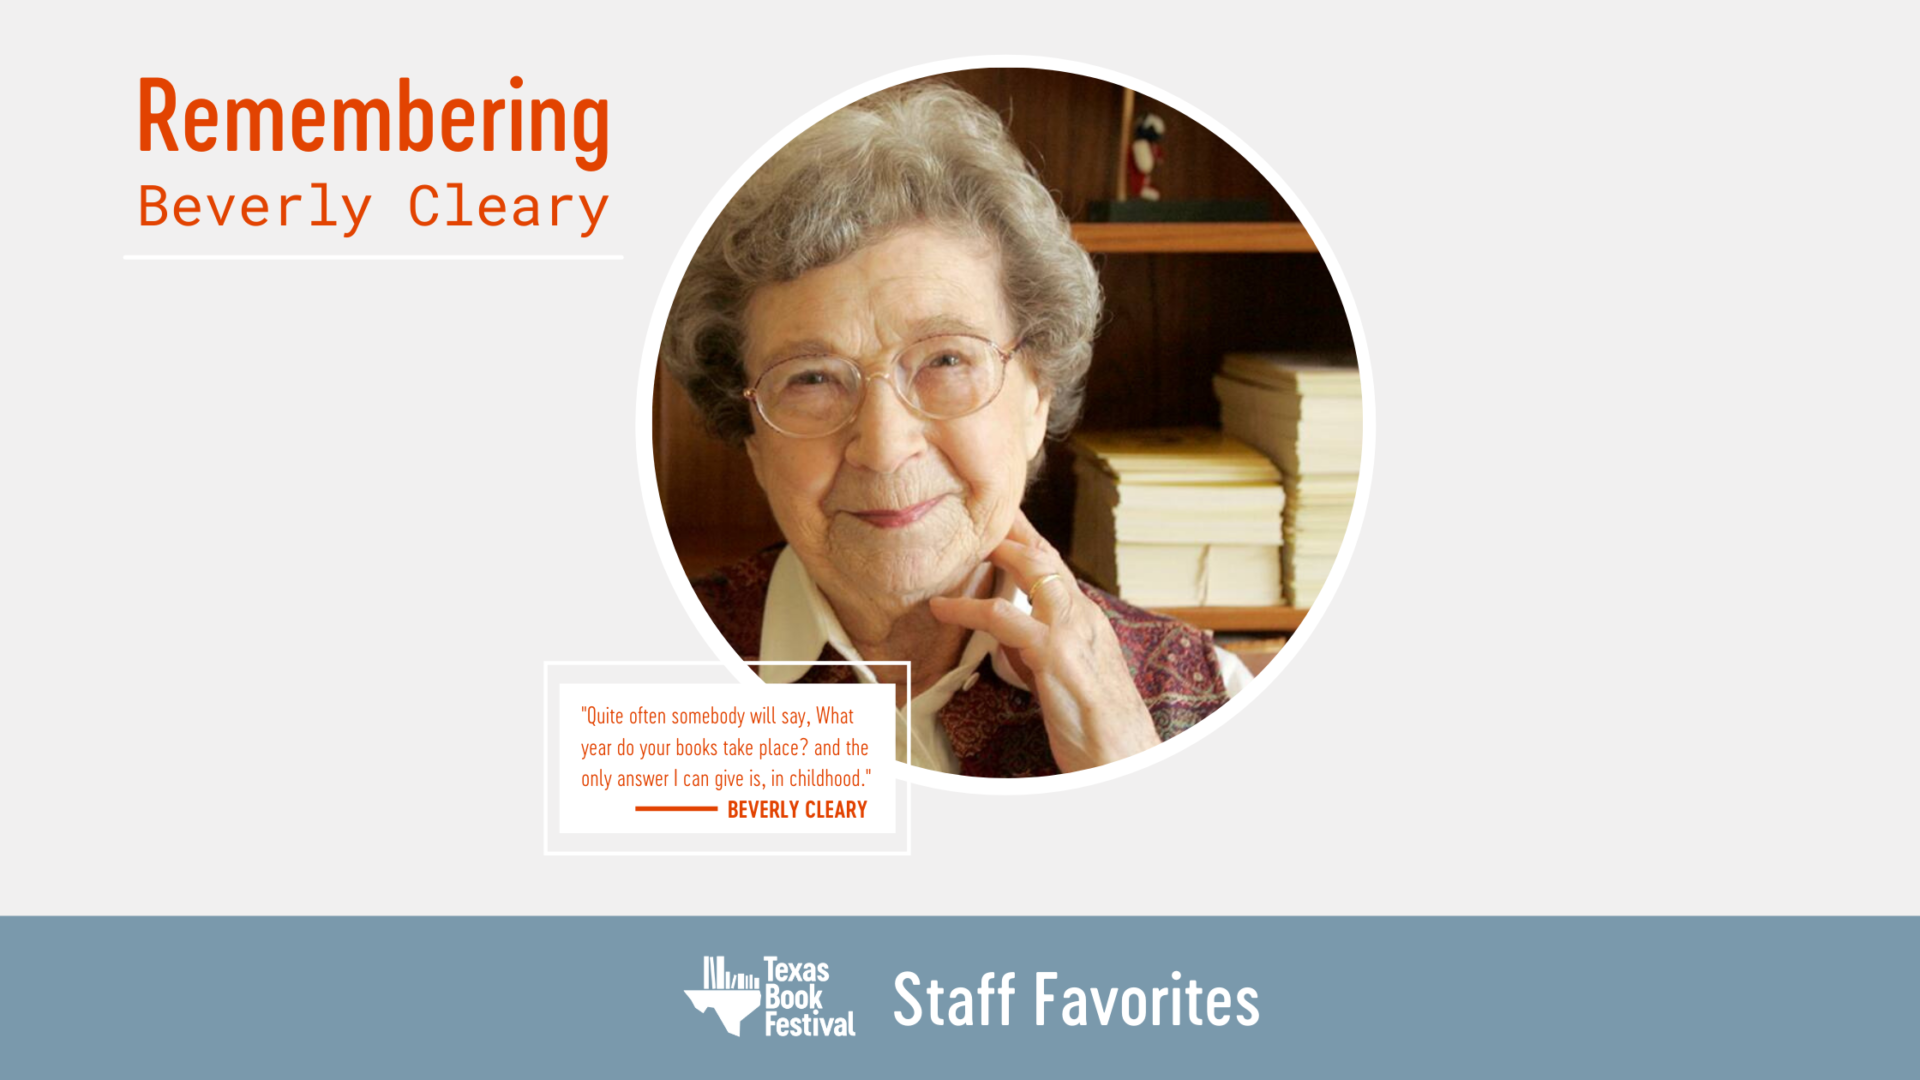 Staff recommended stories by Beverly Cleary